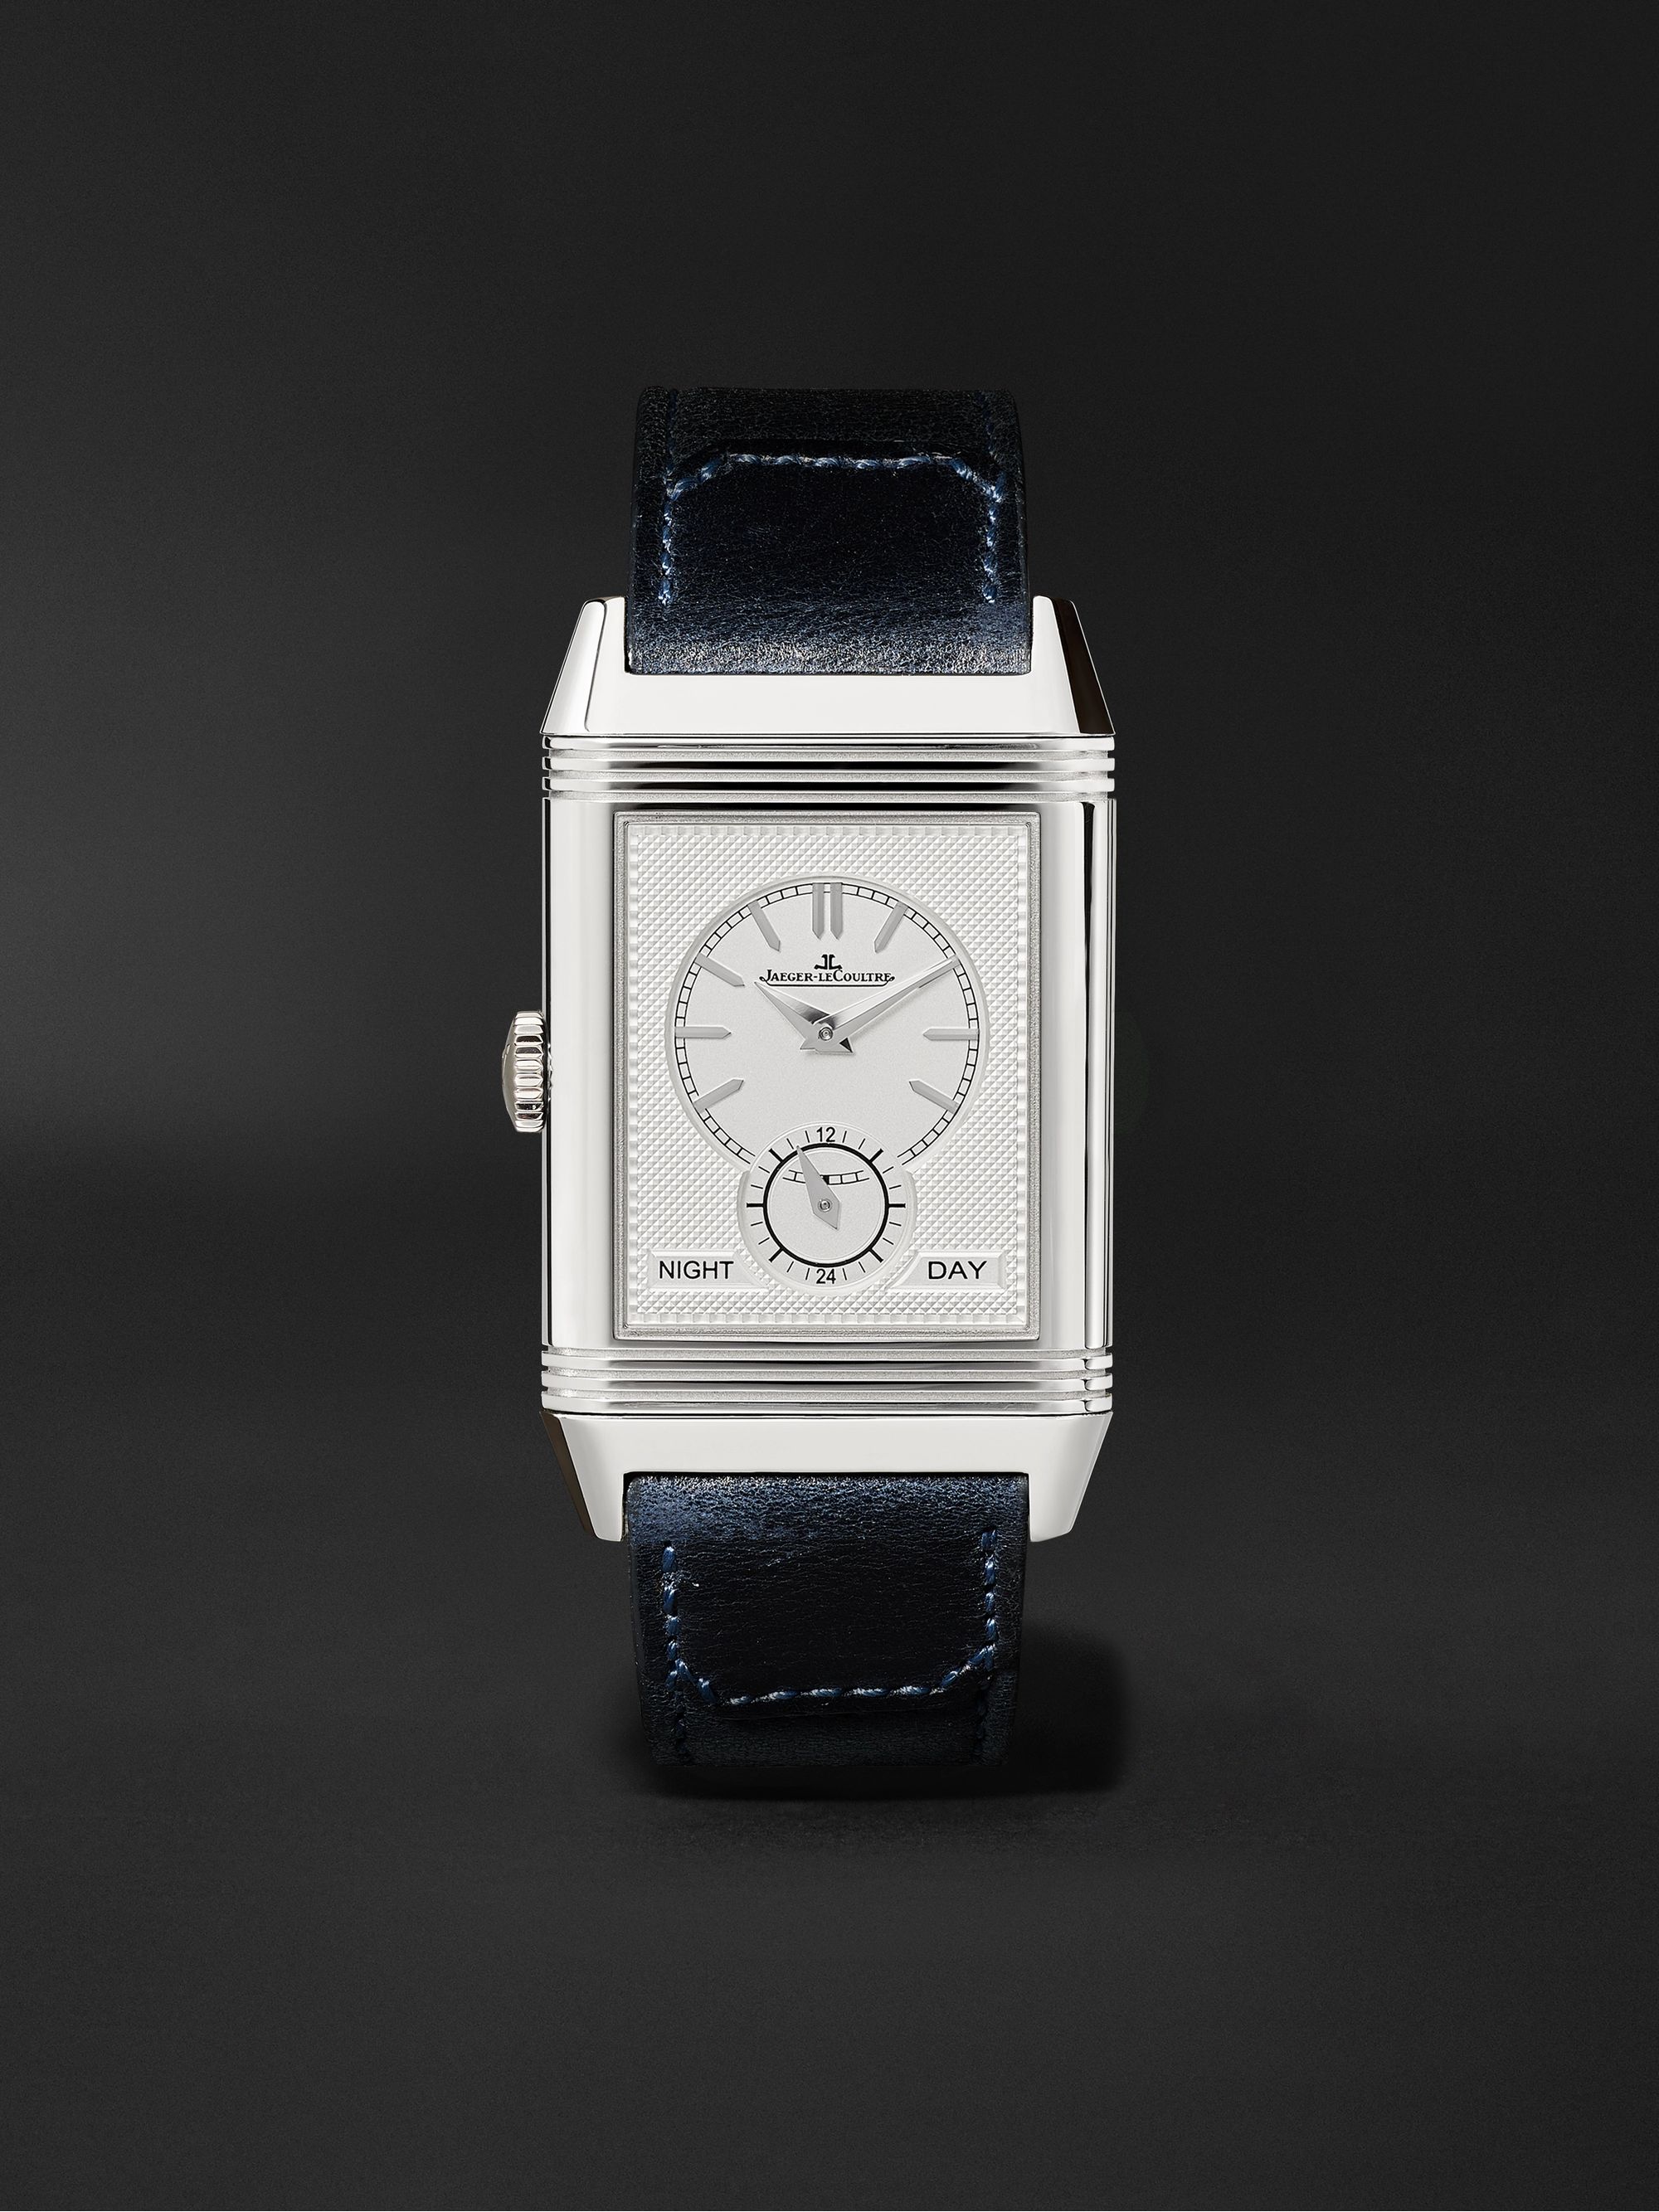 JAEGER-LECOULTRE Reverso Tribute Duoface Hand-Wound 28.3mm Stainless Steel and Leather Watch, Ref. No. 3988482